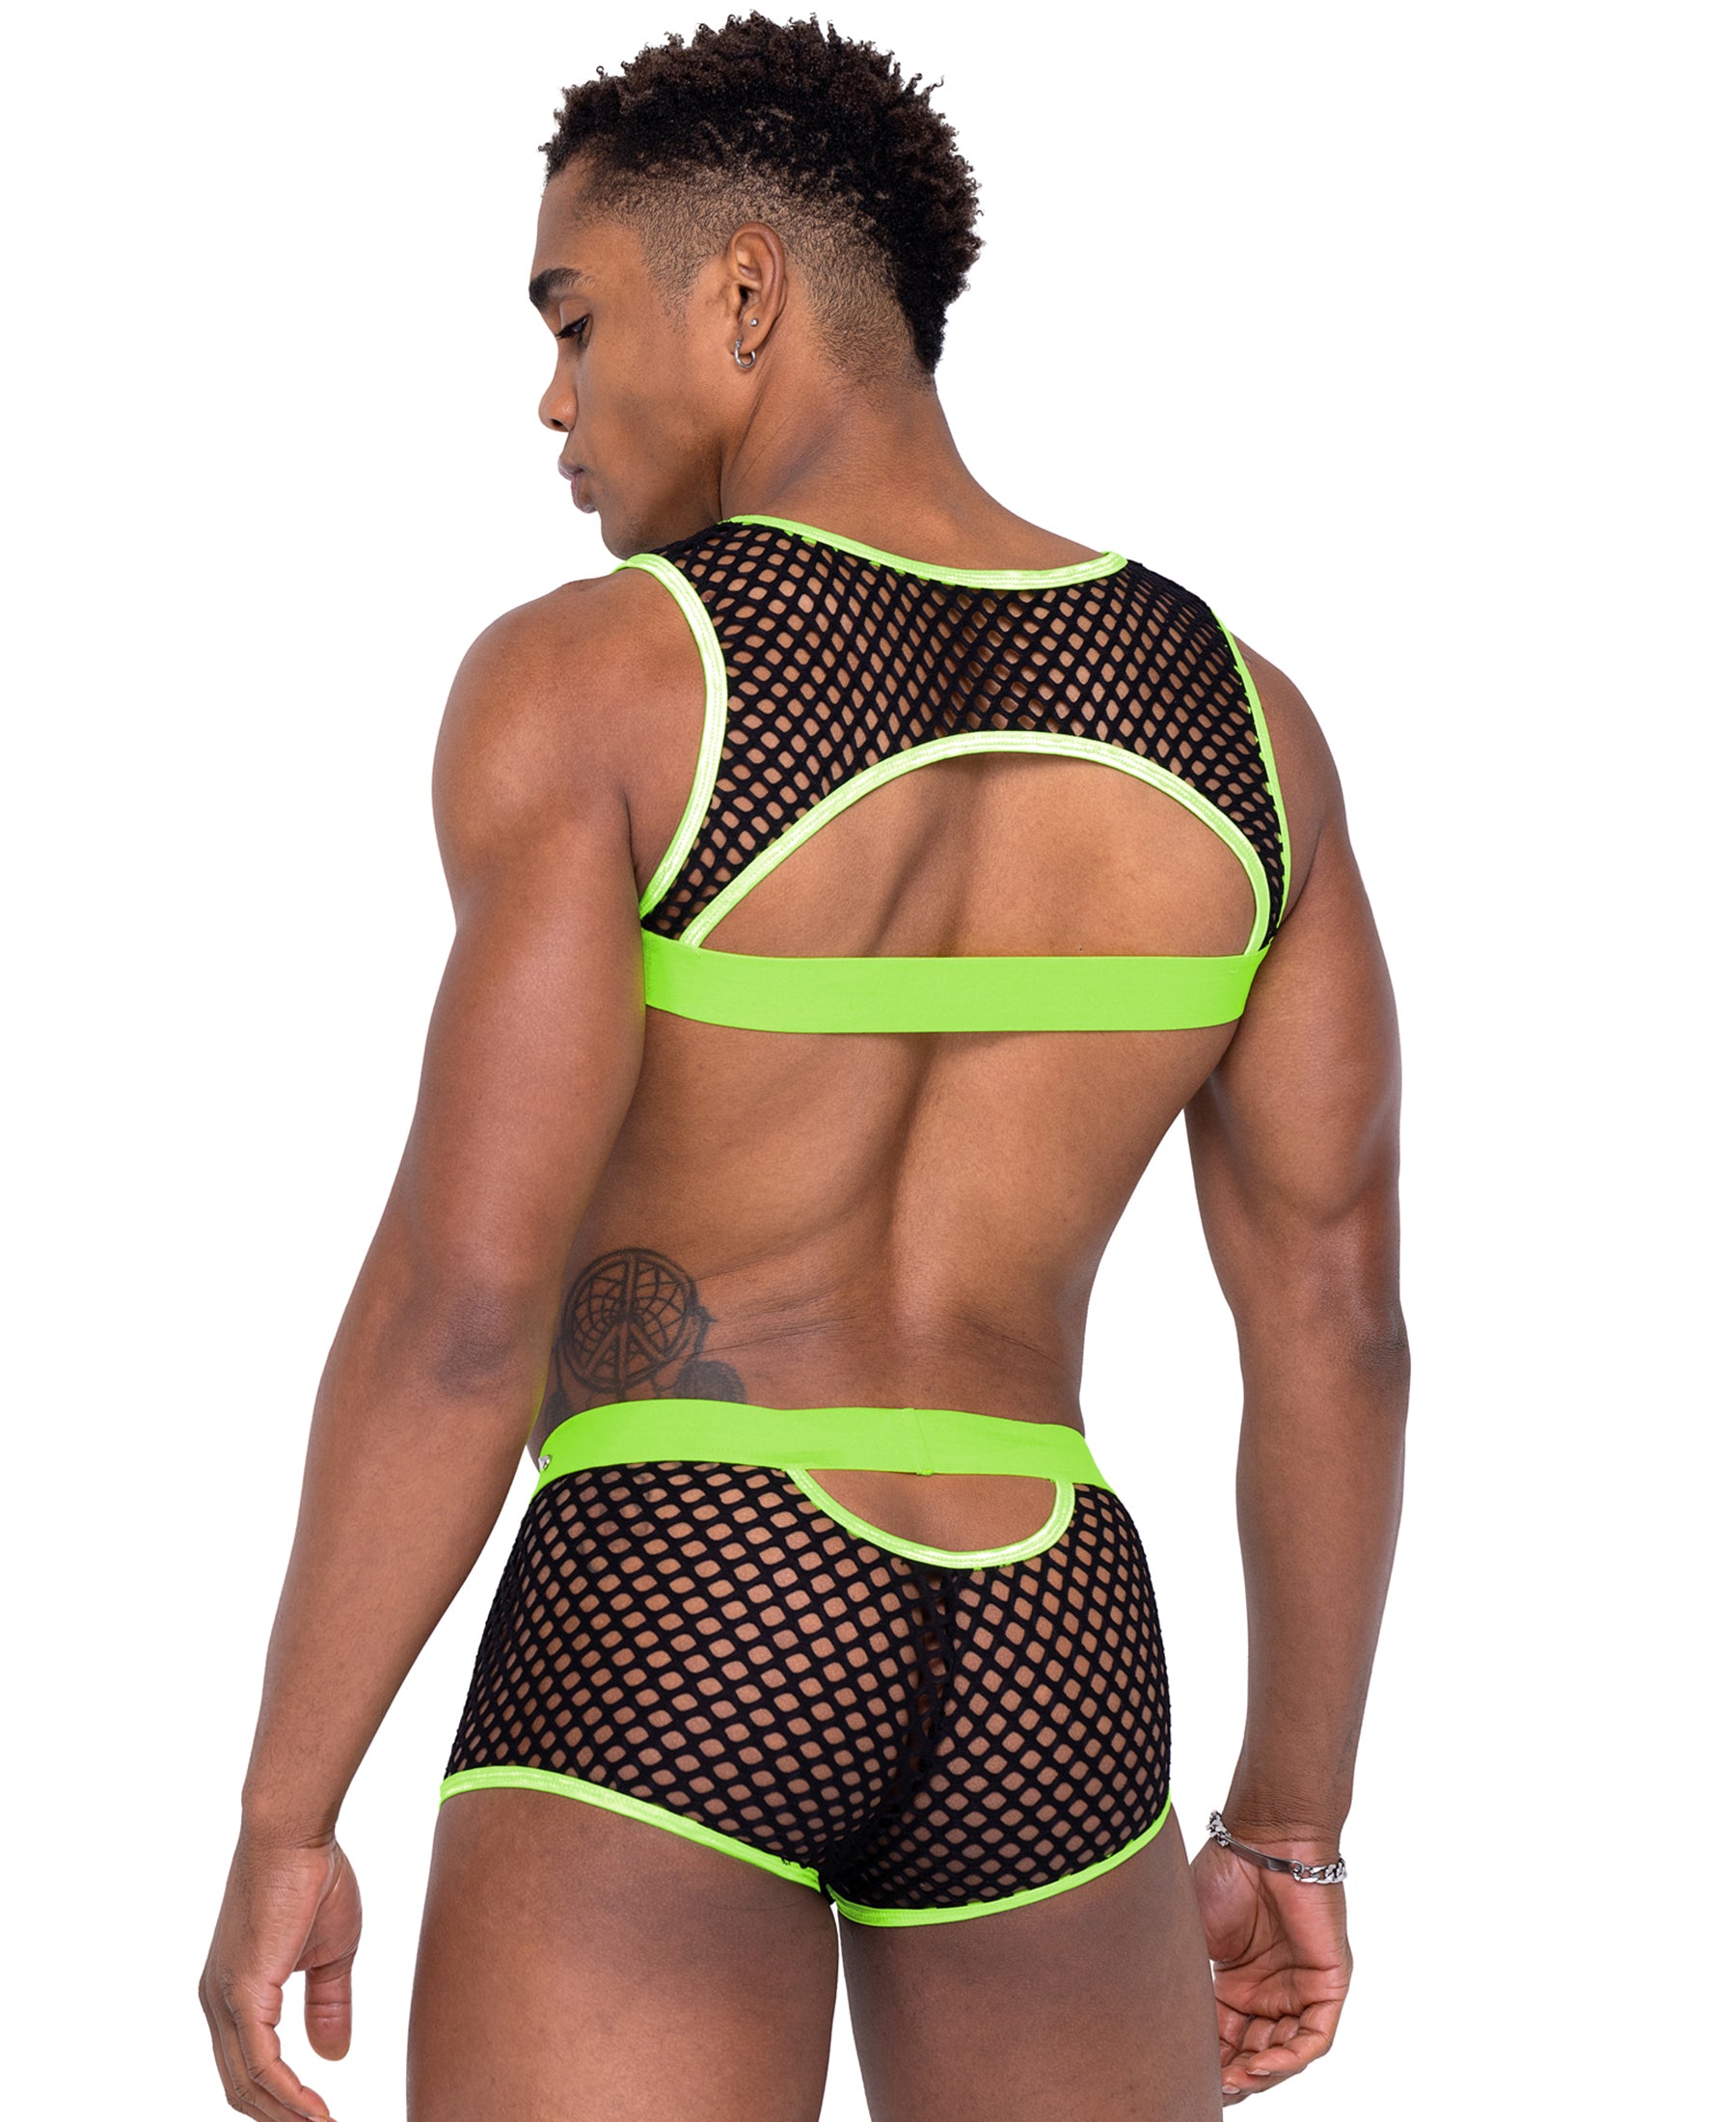 6332 Fishnet & Vinyl Trunks with Glow In the Dark Elastic & Stud Detail and Back Keyhole Opening rear view